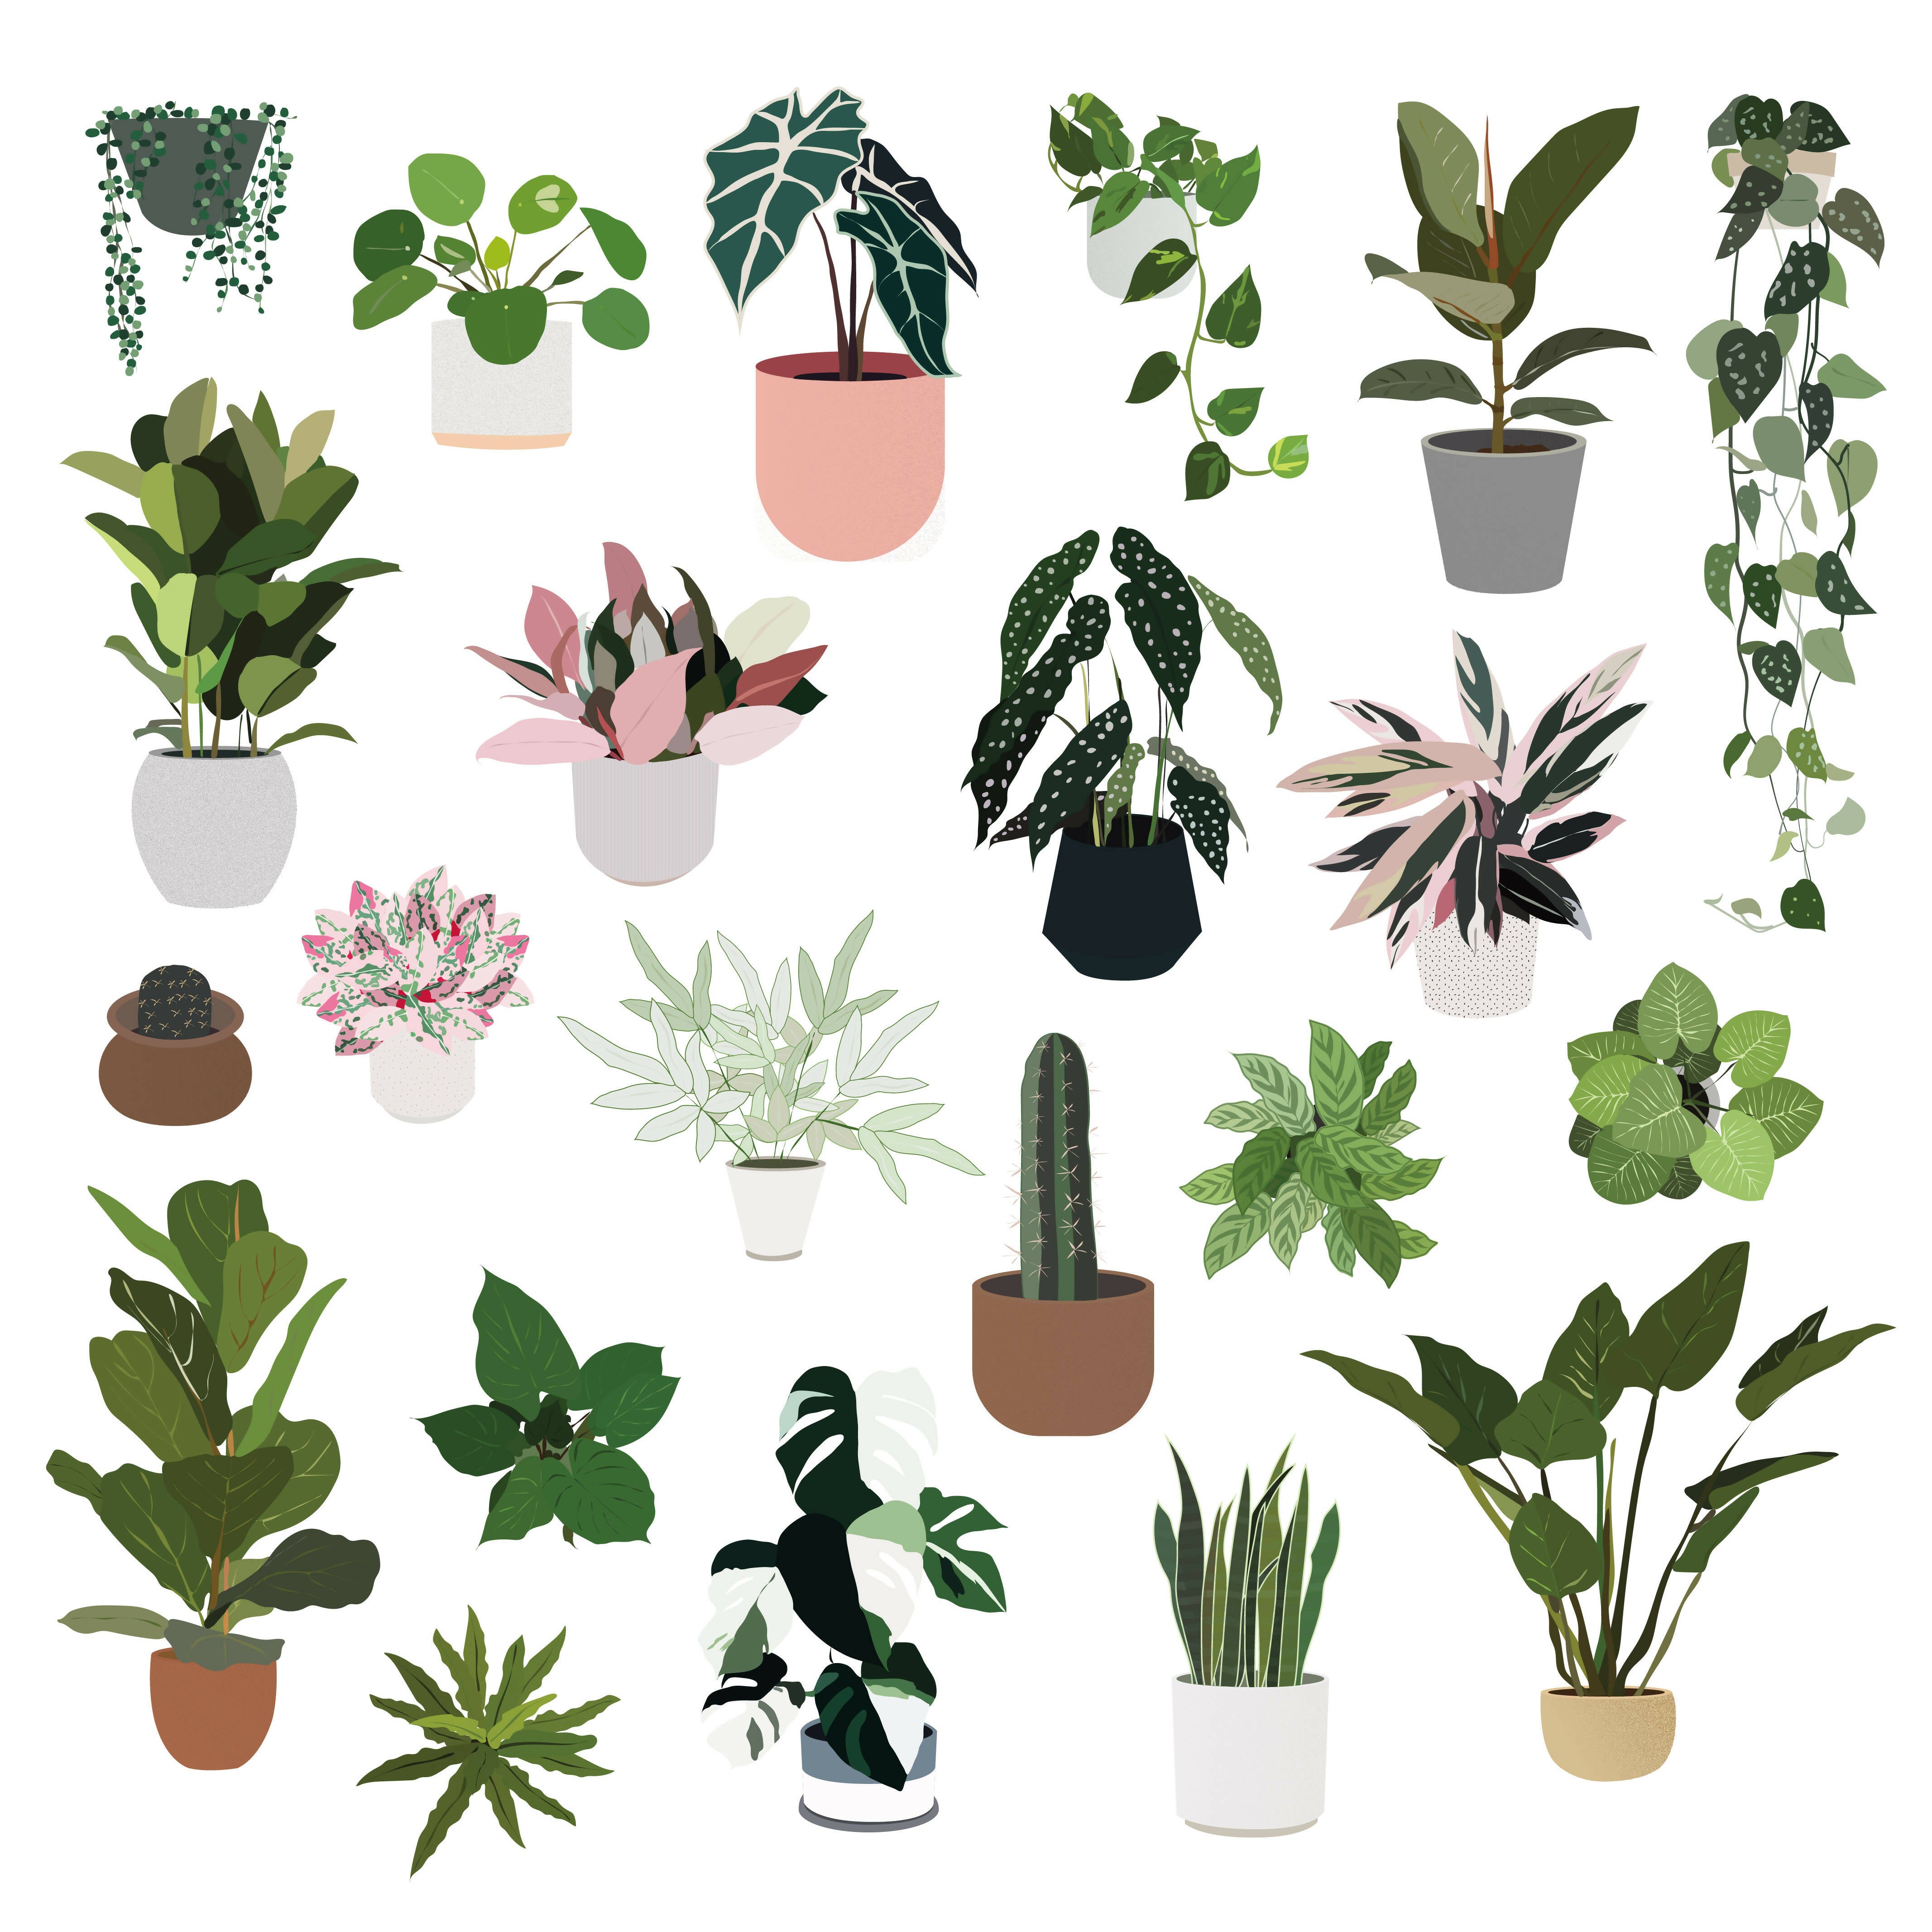 Illustrated Plants (22 figures) | Learn Architecture Online